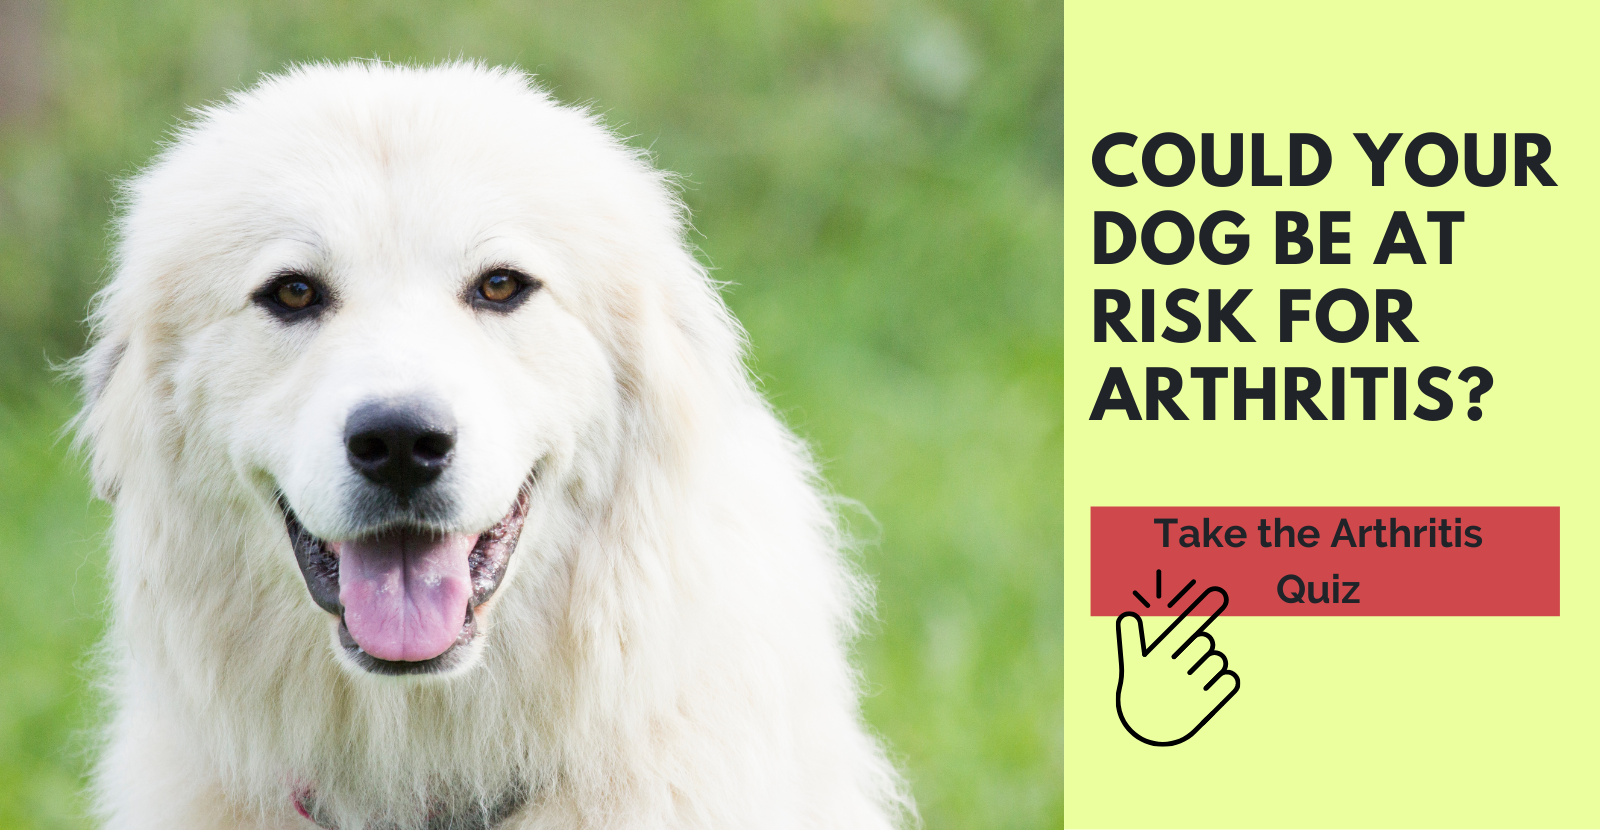 Could your dog be at risk for arthritis?